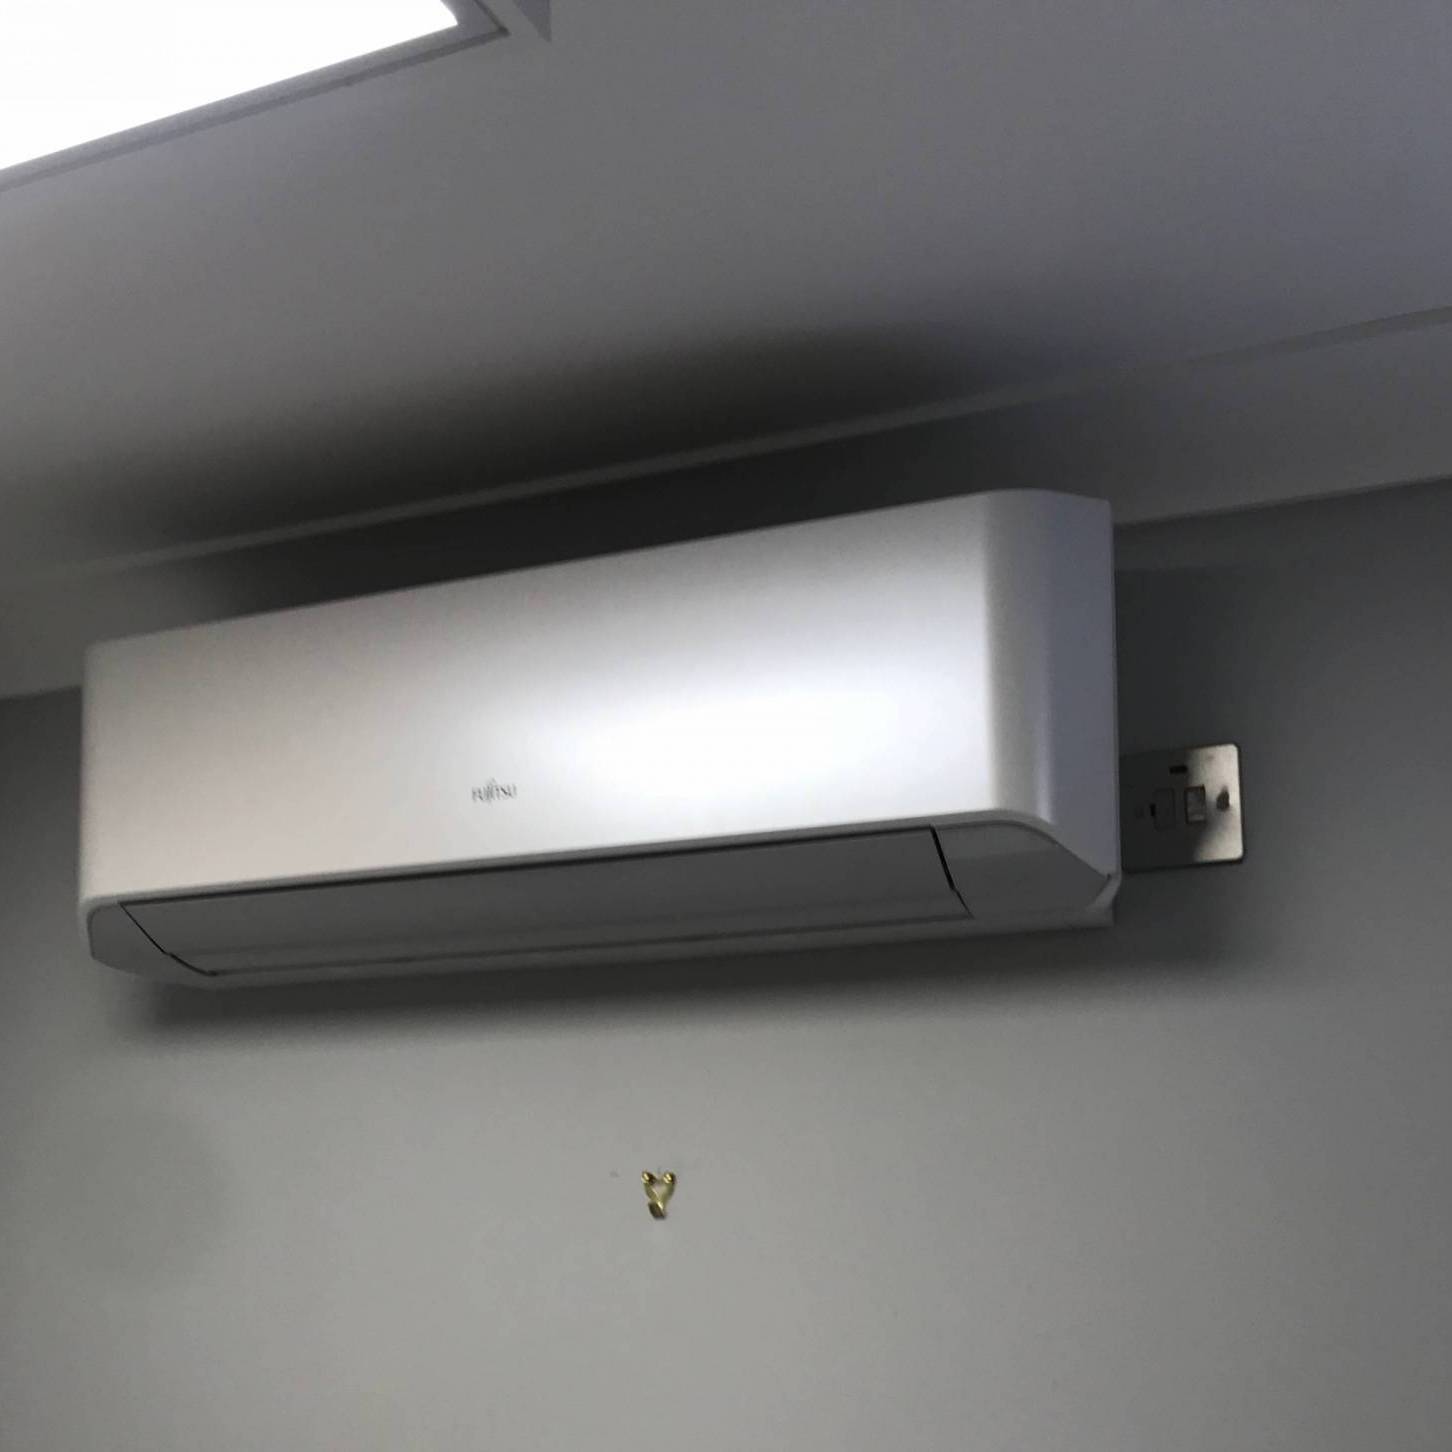 air-conditioning-london-air-conditioning-installation-london